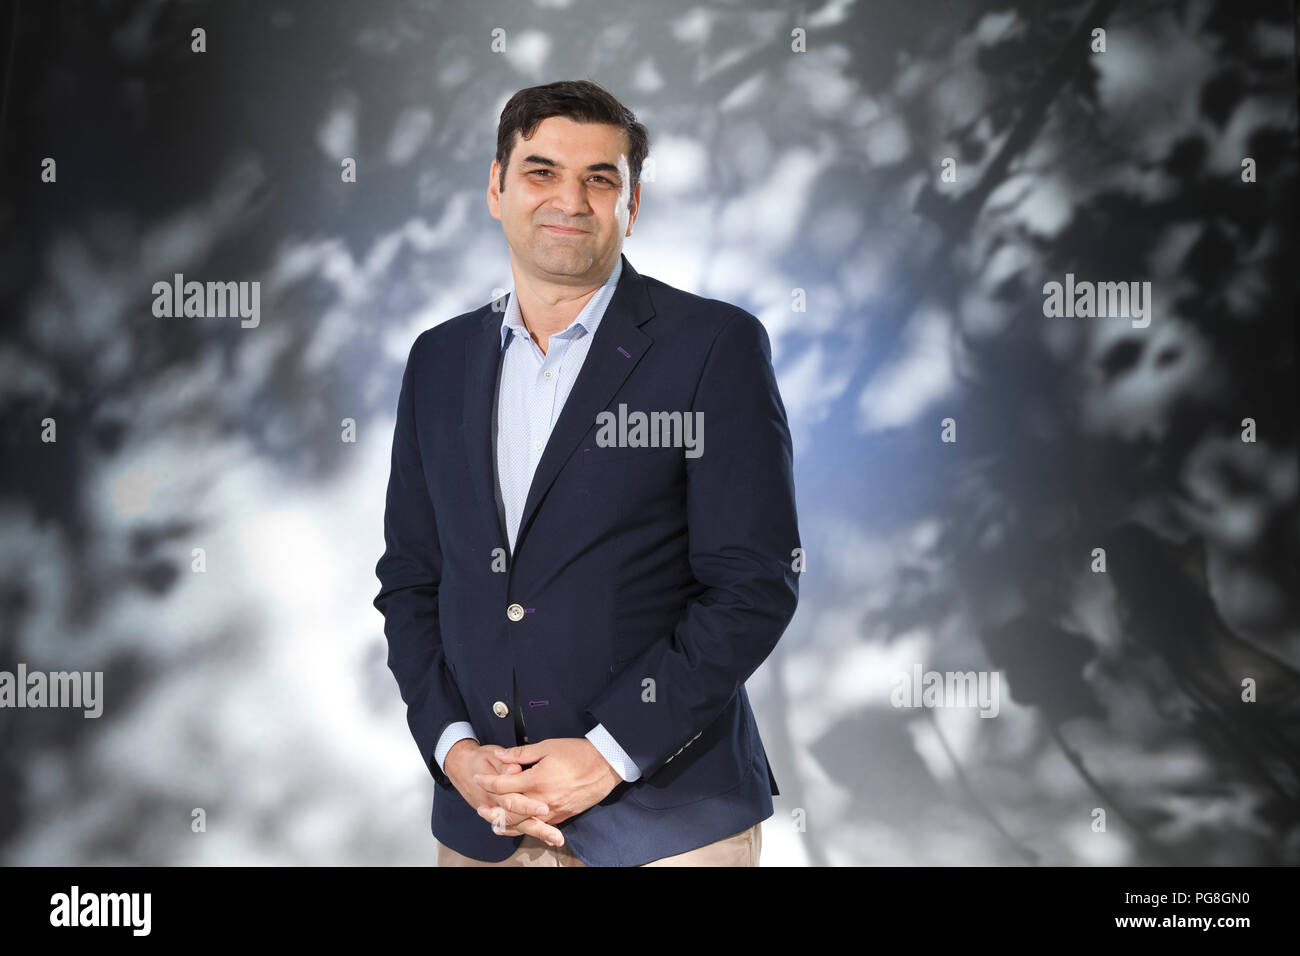 Edinburgh, UK. 24th August, 2018. Gordon Corera, is a British author and journalist. He is the BBC's Security Correspondent and specializes in computer technology. Pictured at the Edinburgh International Book Festival. Edinburgh, Scotland.  Picture by Gary Doak / Alamy Live News Stock Photo